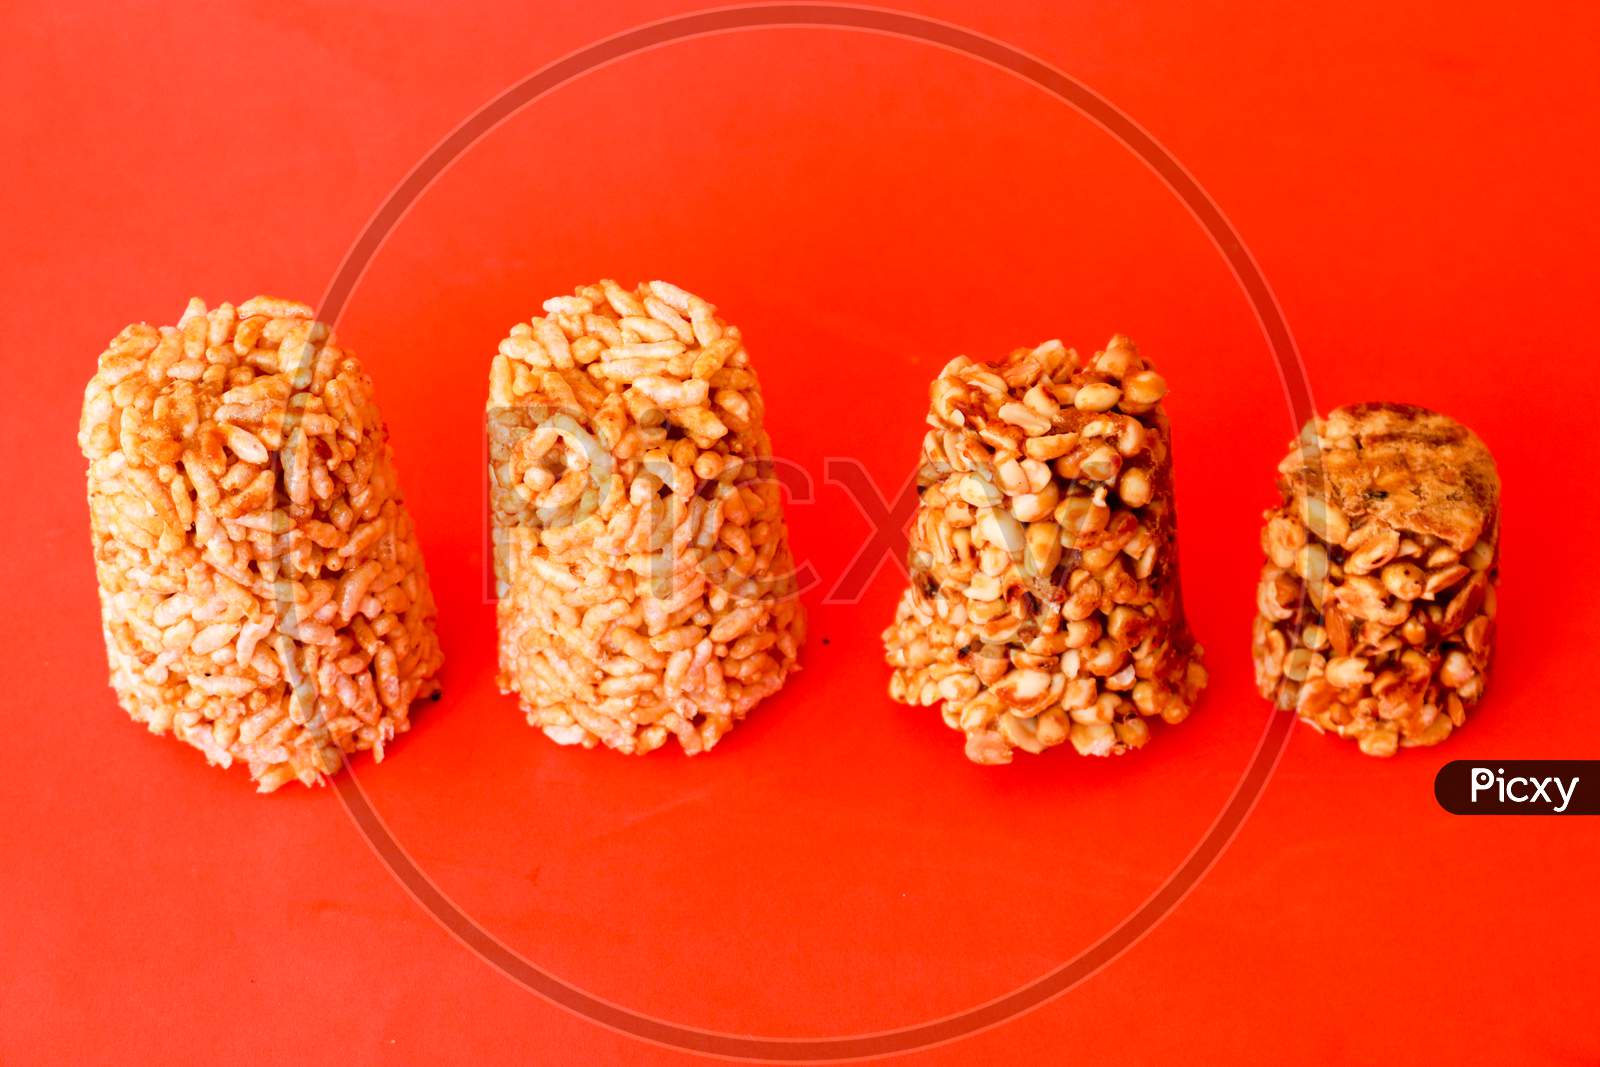 Indian Healthy Snack Made Of Jaggery, Puffed Rice And peanuts On an Isolated Red Background